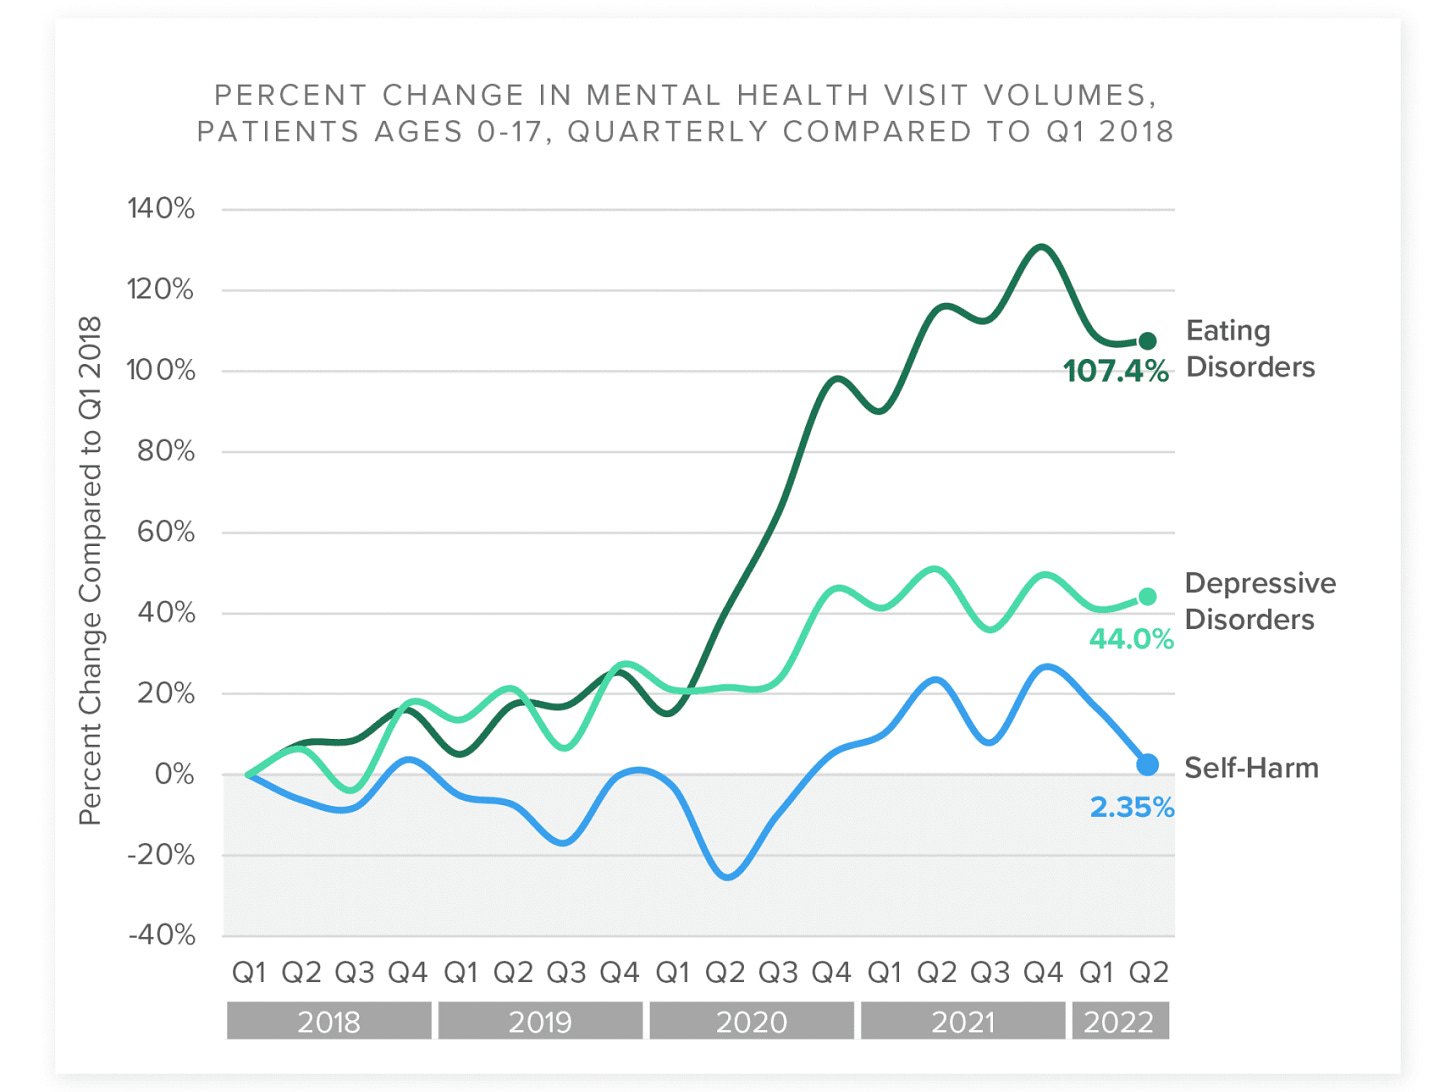 Teen mental health over time